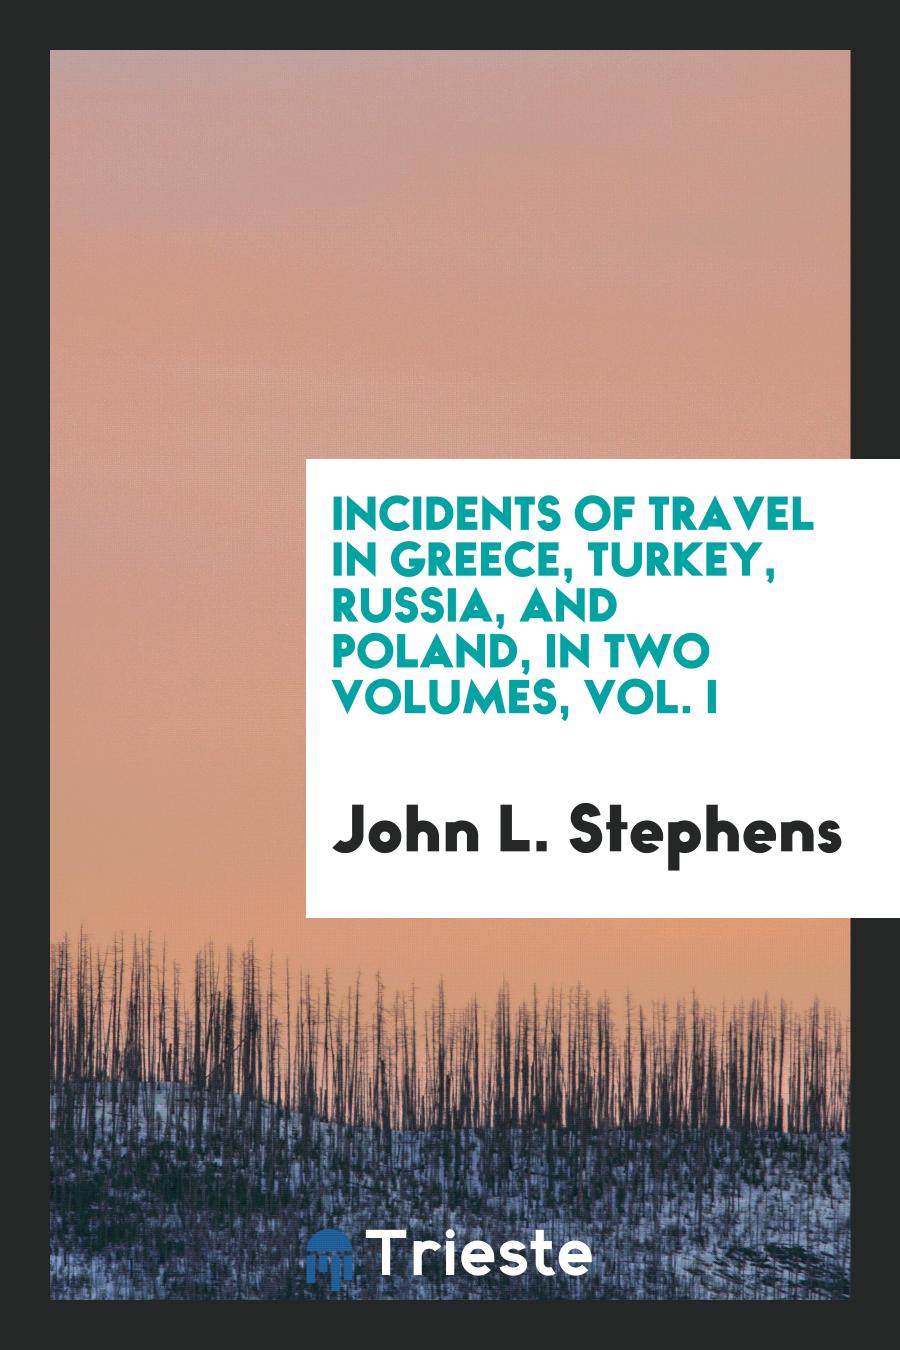 Incidents of Travel in Greece, Turkey, Russia, and Poland, in Two Volumes, Vol. I